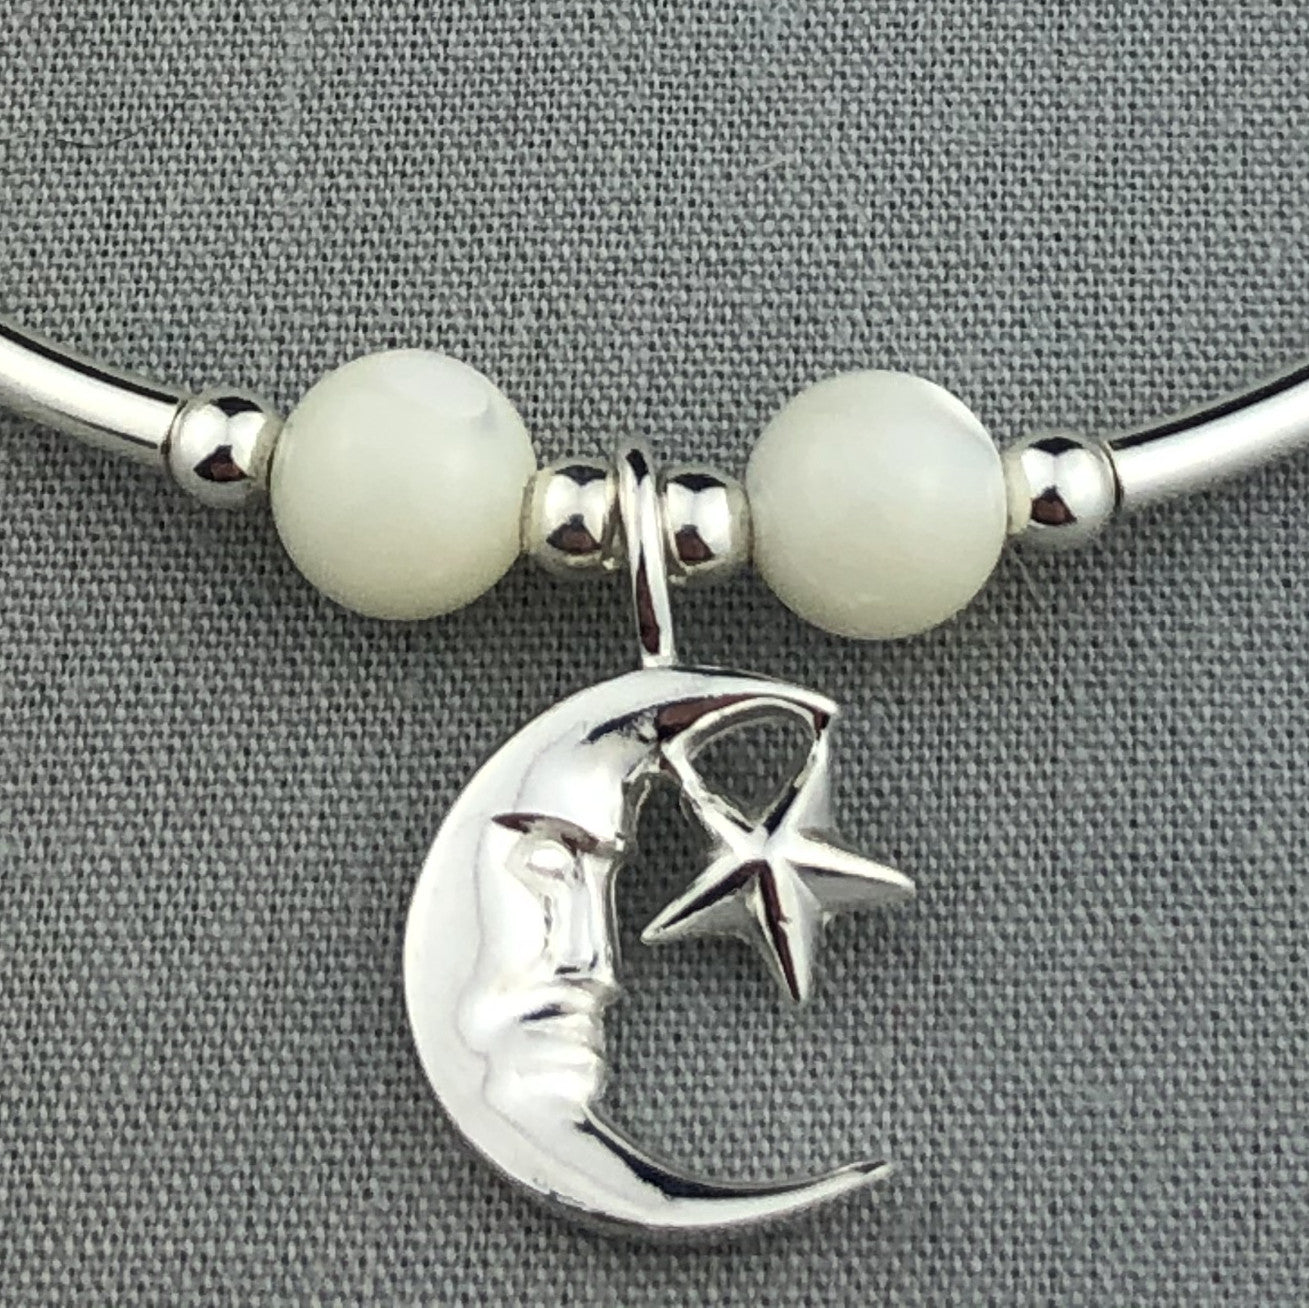 Closeup of Moon & star charm & moonstone women's sterling silver stacking bracelet by My Silver Wish